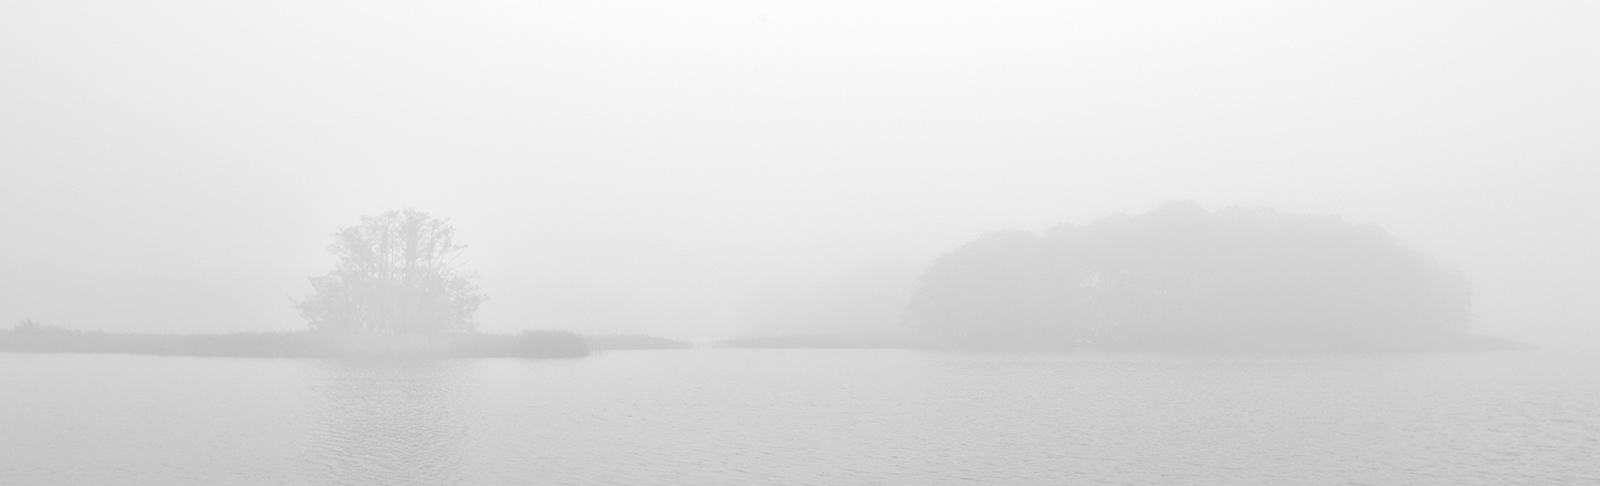 Foggy lake with small islands